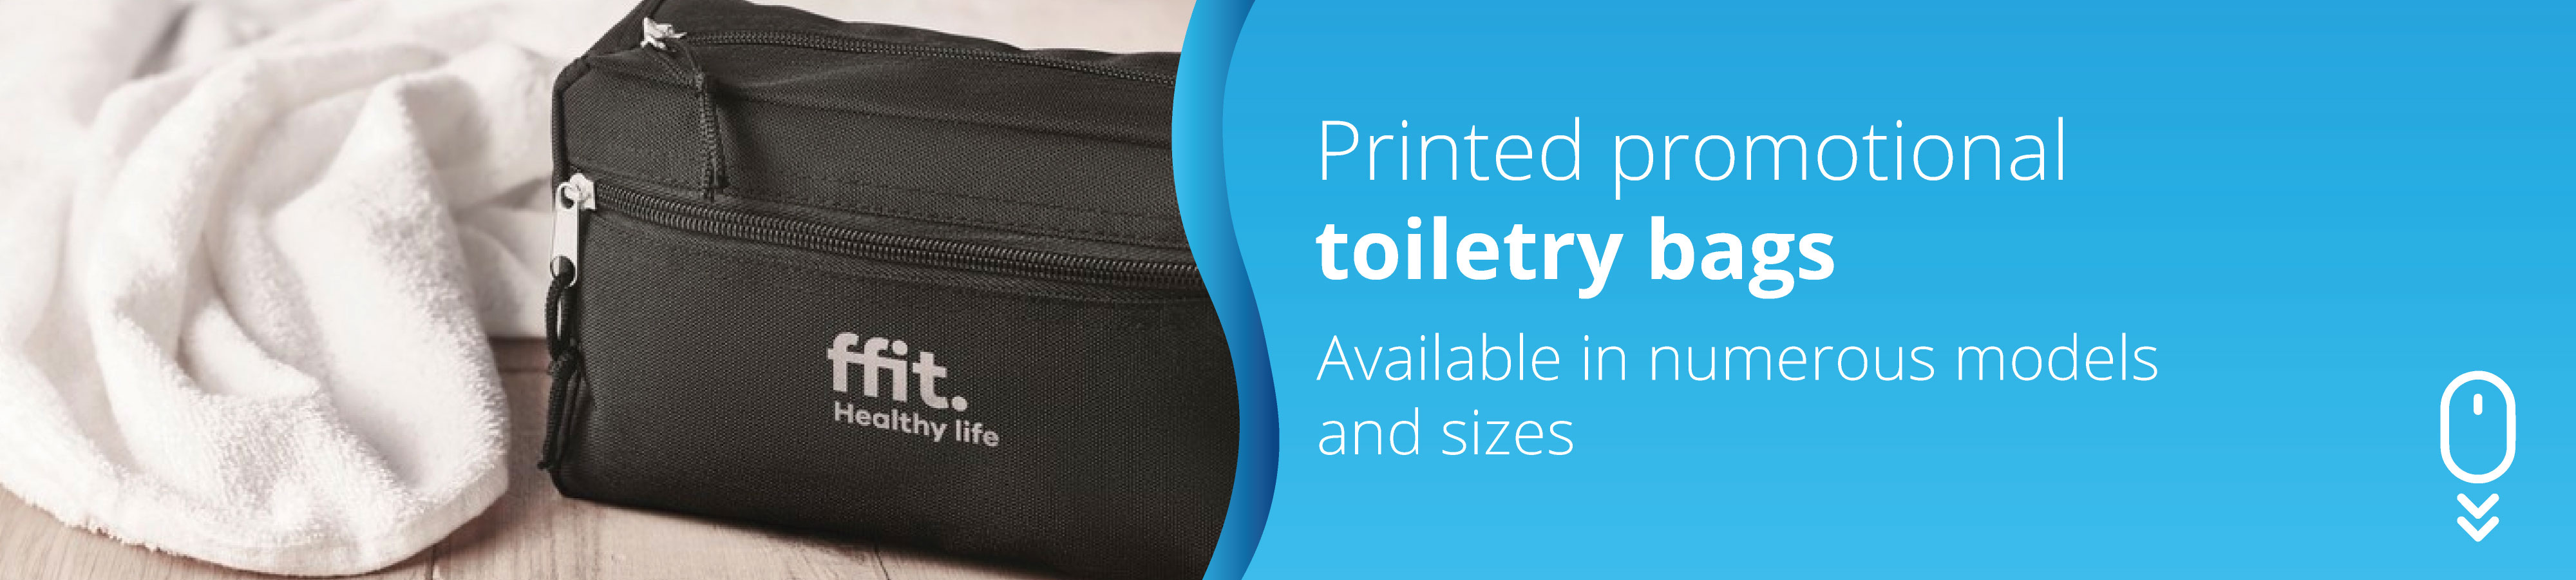 printed-promotional-toiletry-bags